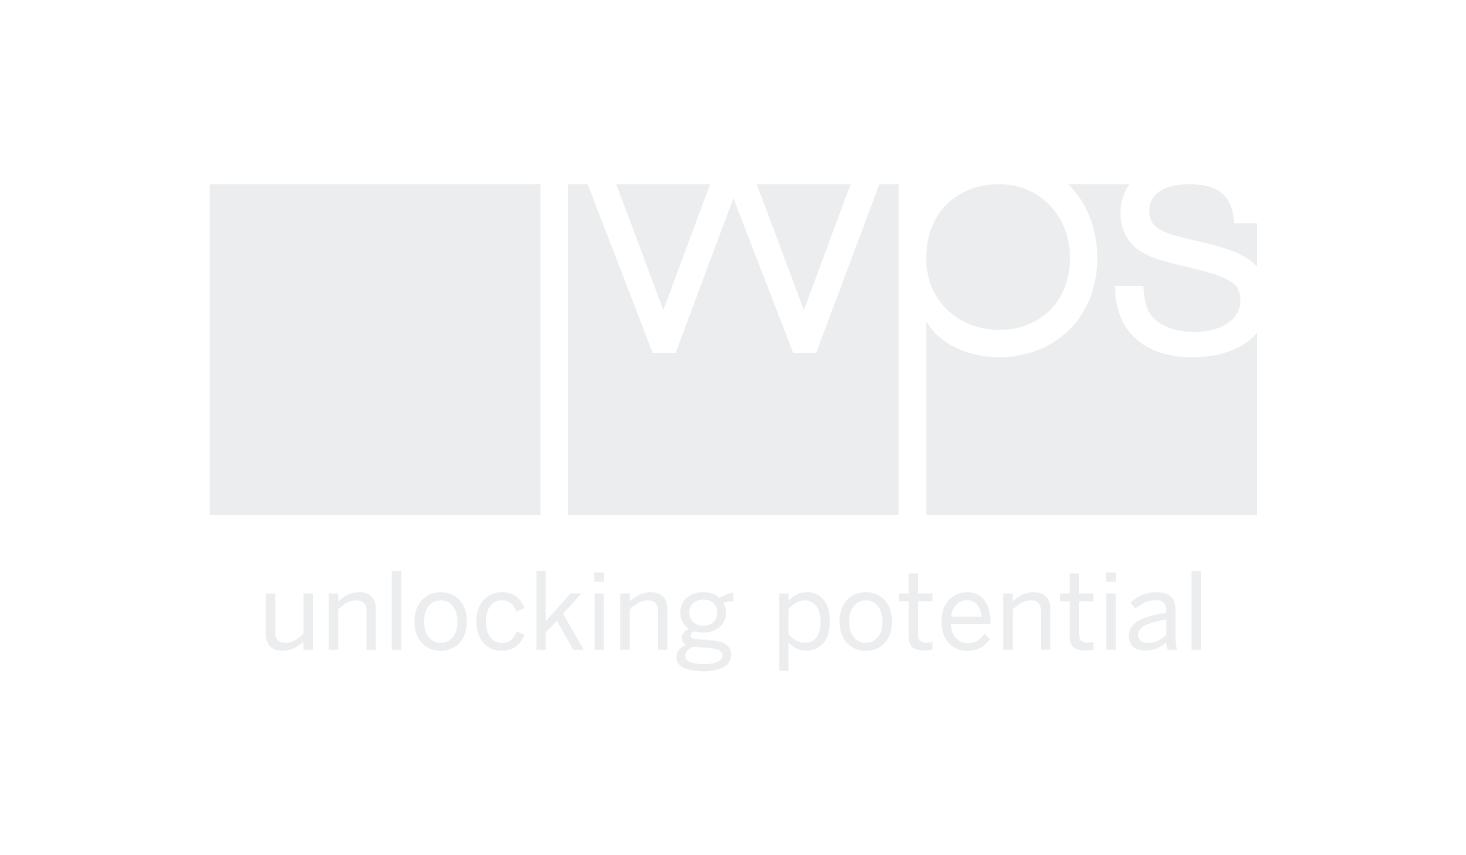 Outline version of the standard logo for WPS (Workplace Safety & Prevention Services).